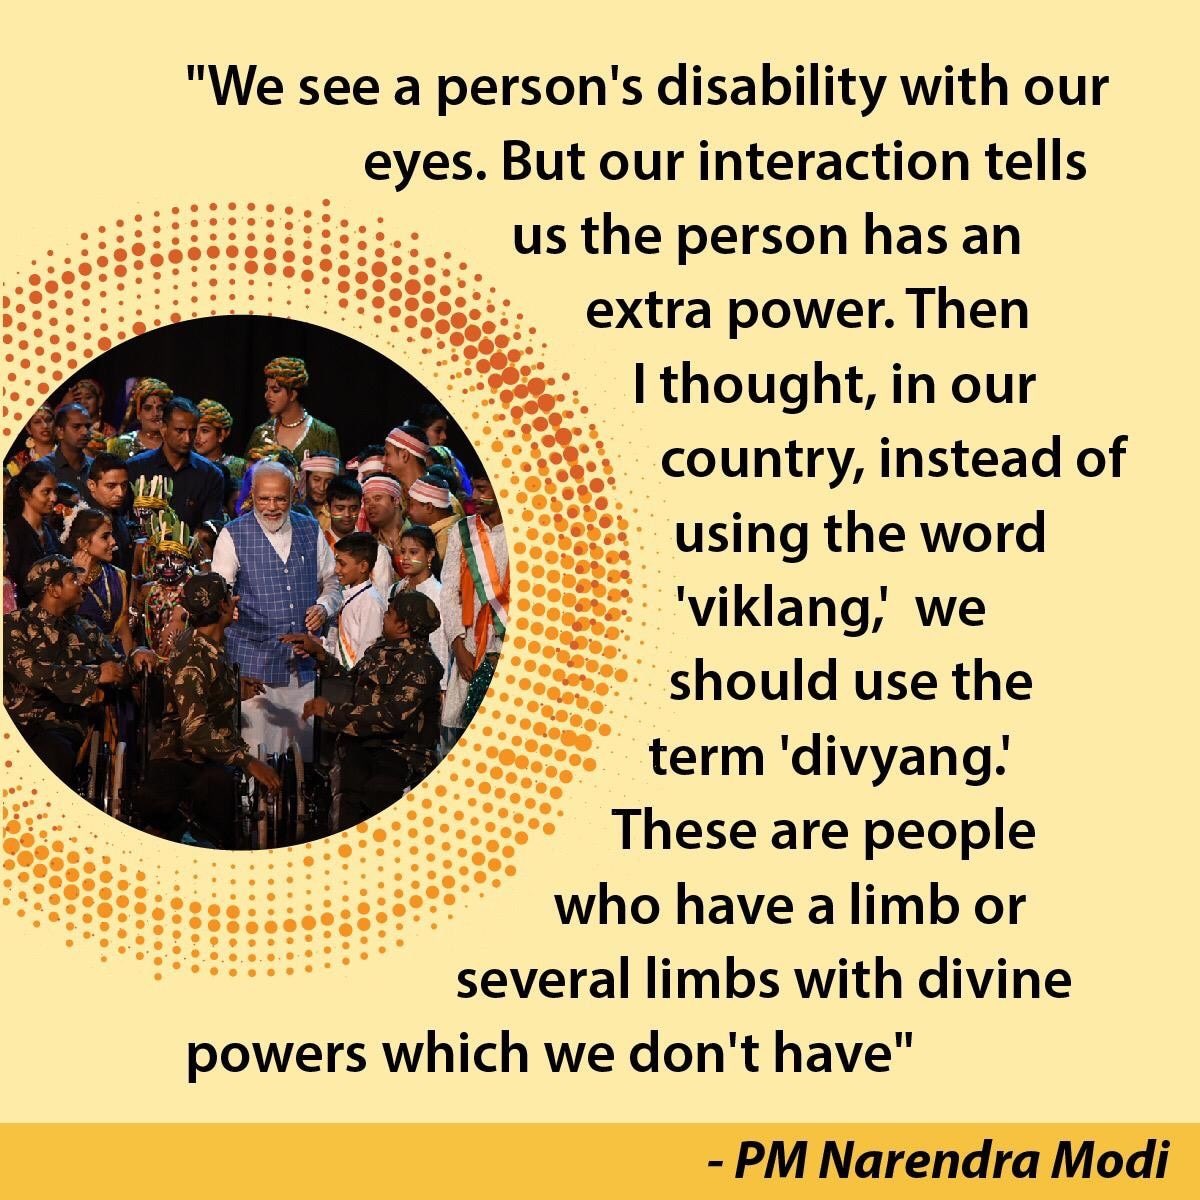 Setting a stage for social empowerment
#AccessibleIndia